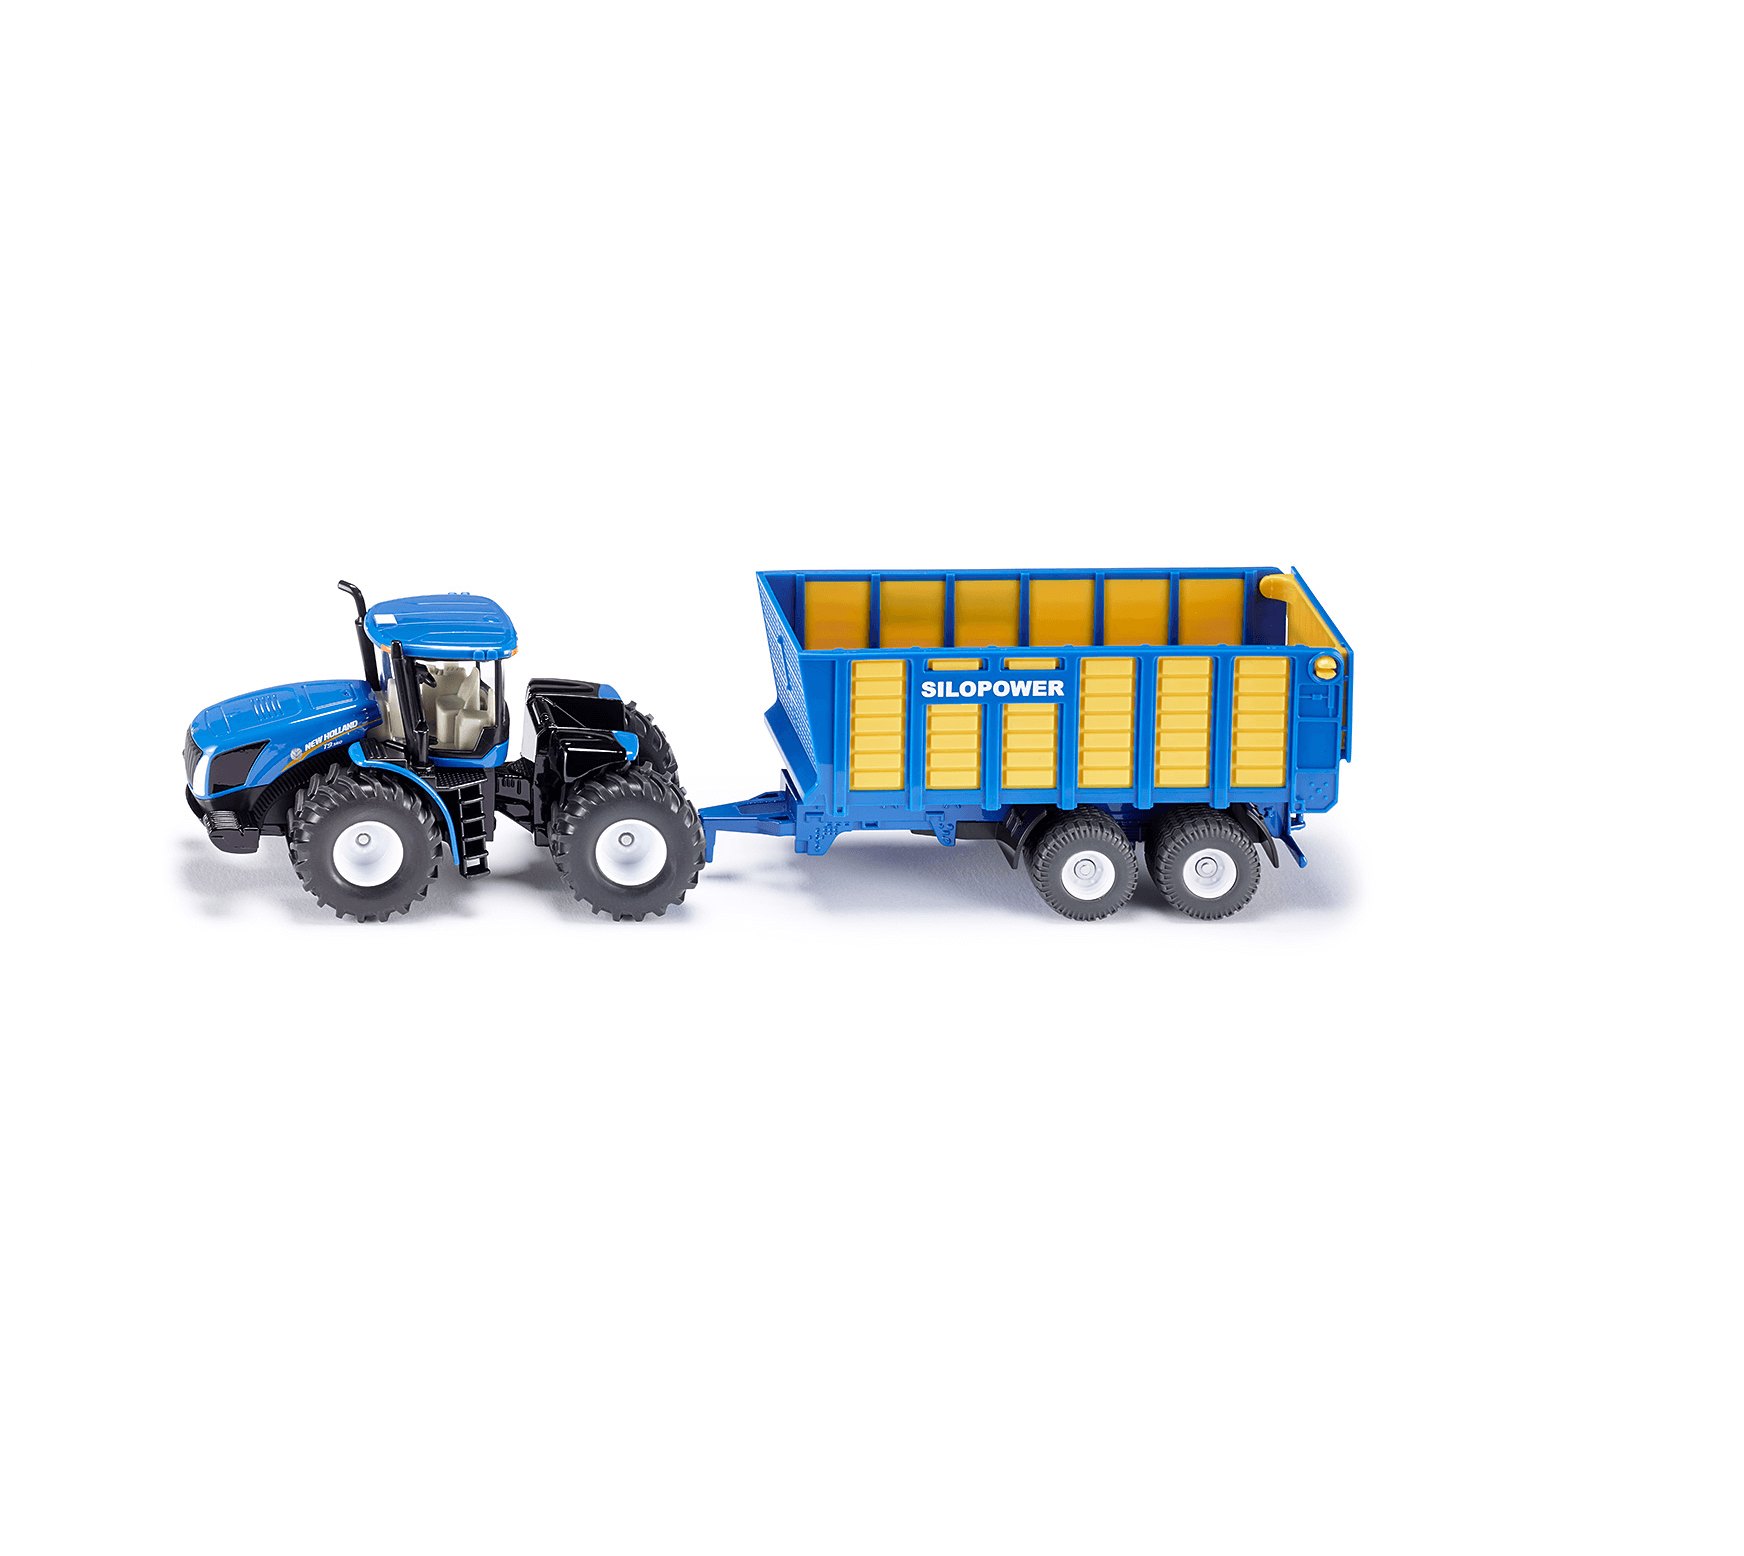 Acheter Siku New Holland avec chargeur frontal - Voitures, camions